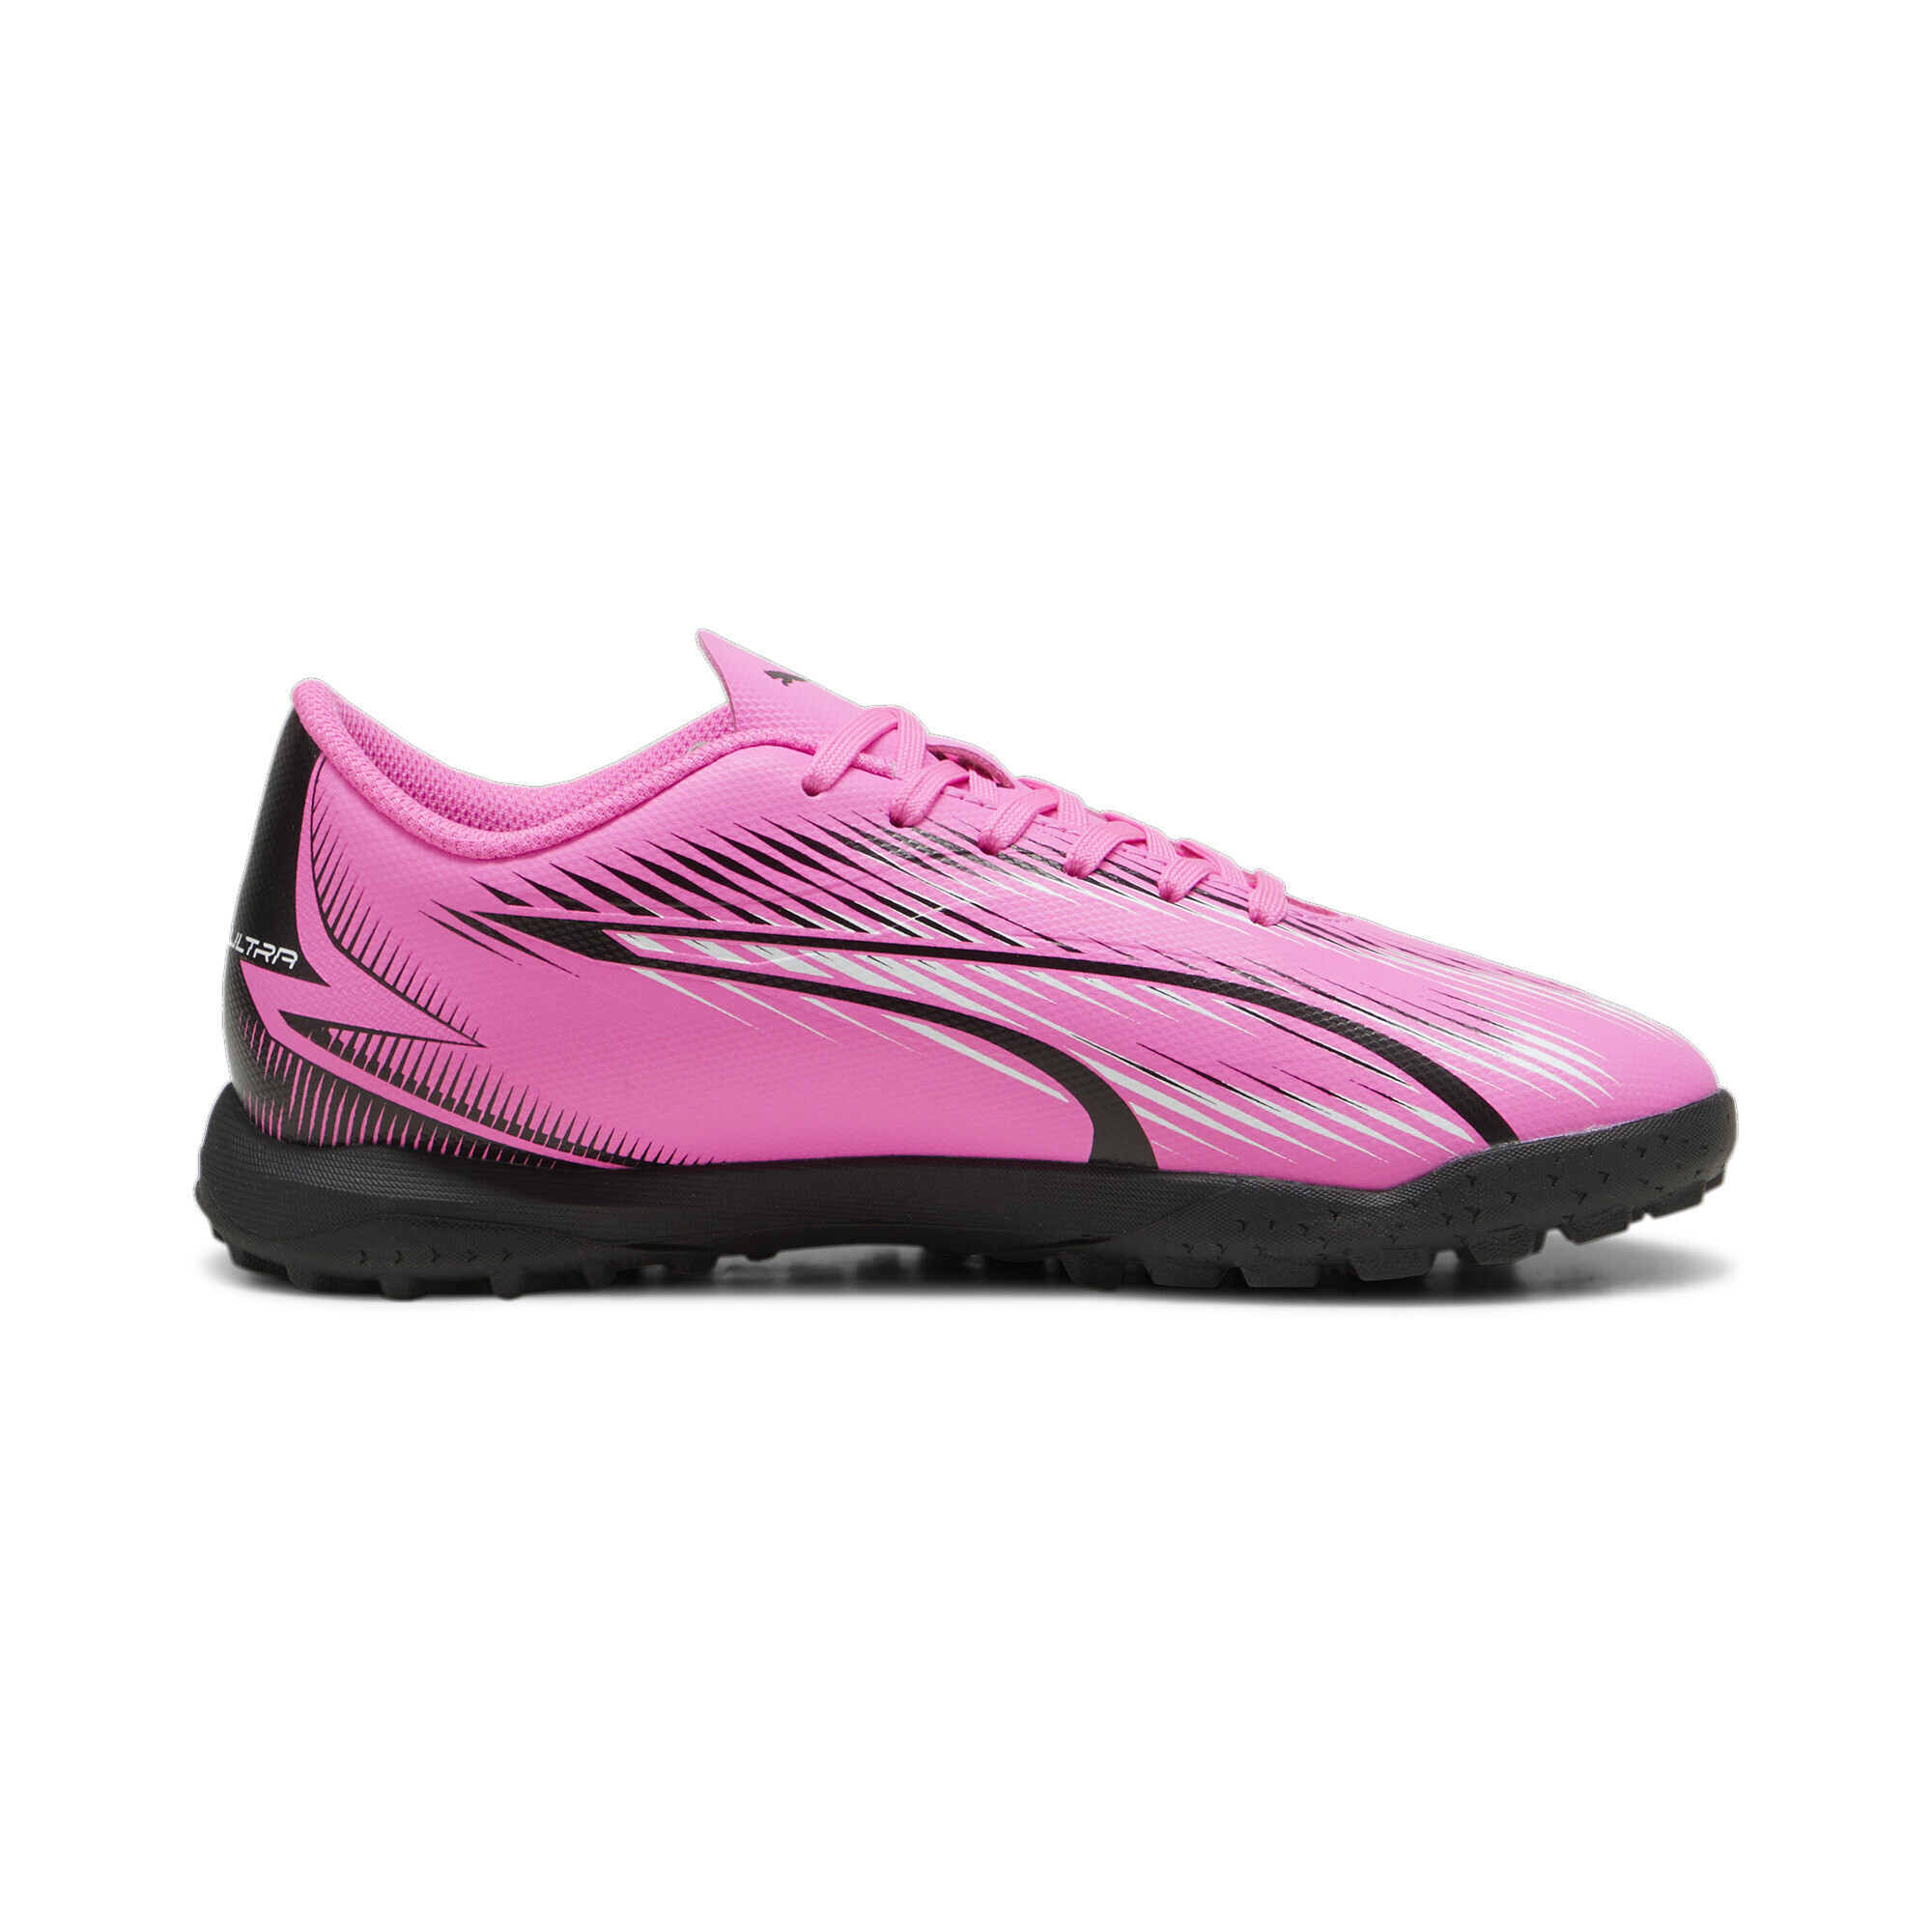 PUMA ULTRA PLAY TT Youth Football Boots In Pink, Size EU 33